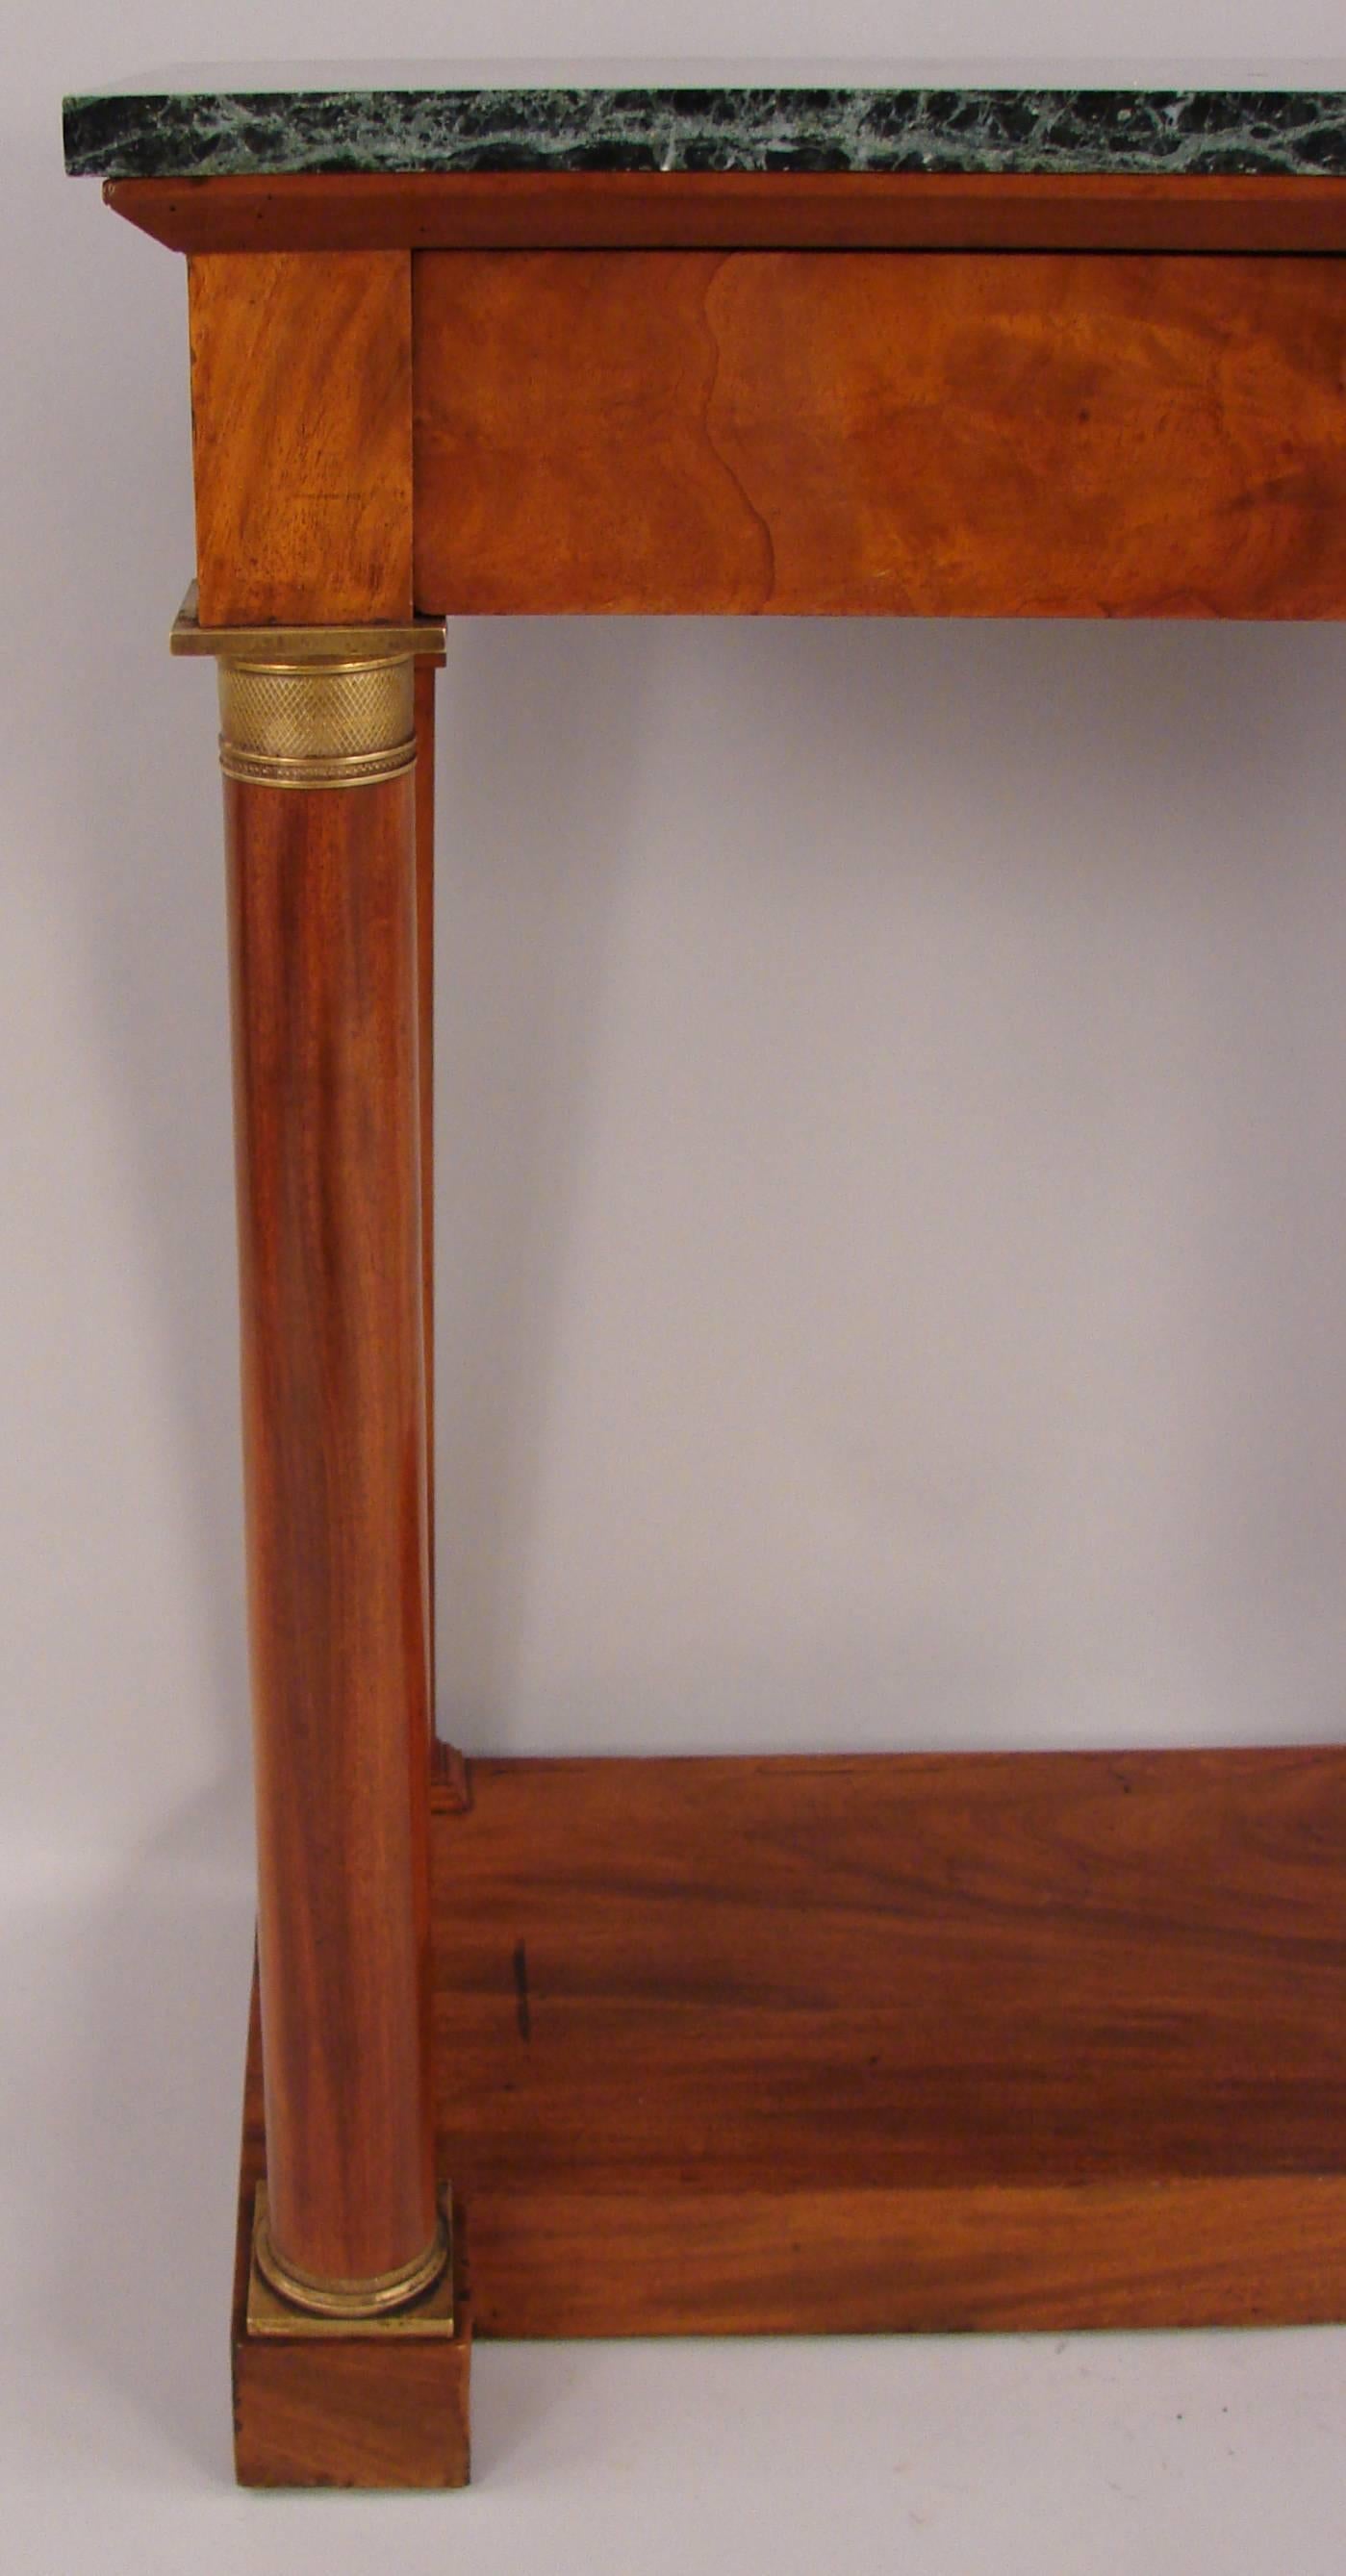 A Charles X period mahogany gilt metal mounted small console table, the replaced marble top above a single drawer flanked by columnar supports terminating in a plinth base, circa 1830.